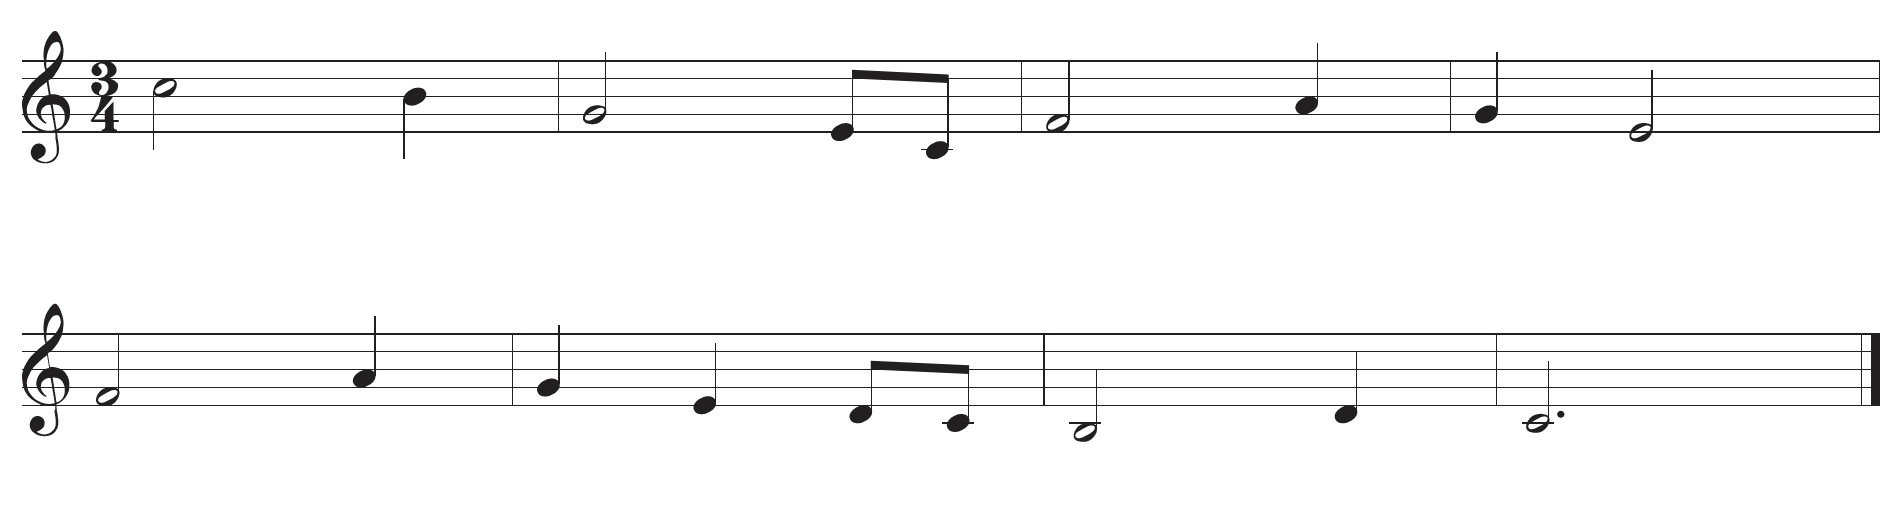 A simple melody in the key of C major.